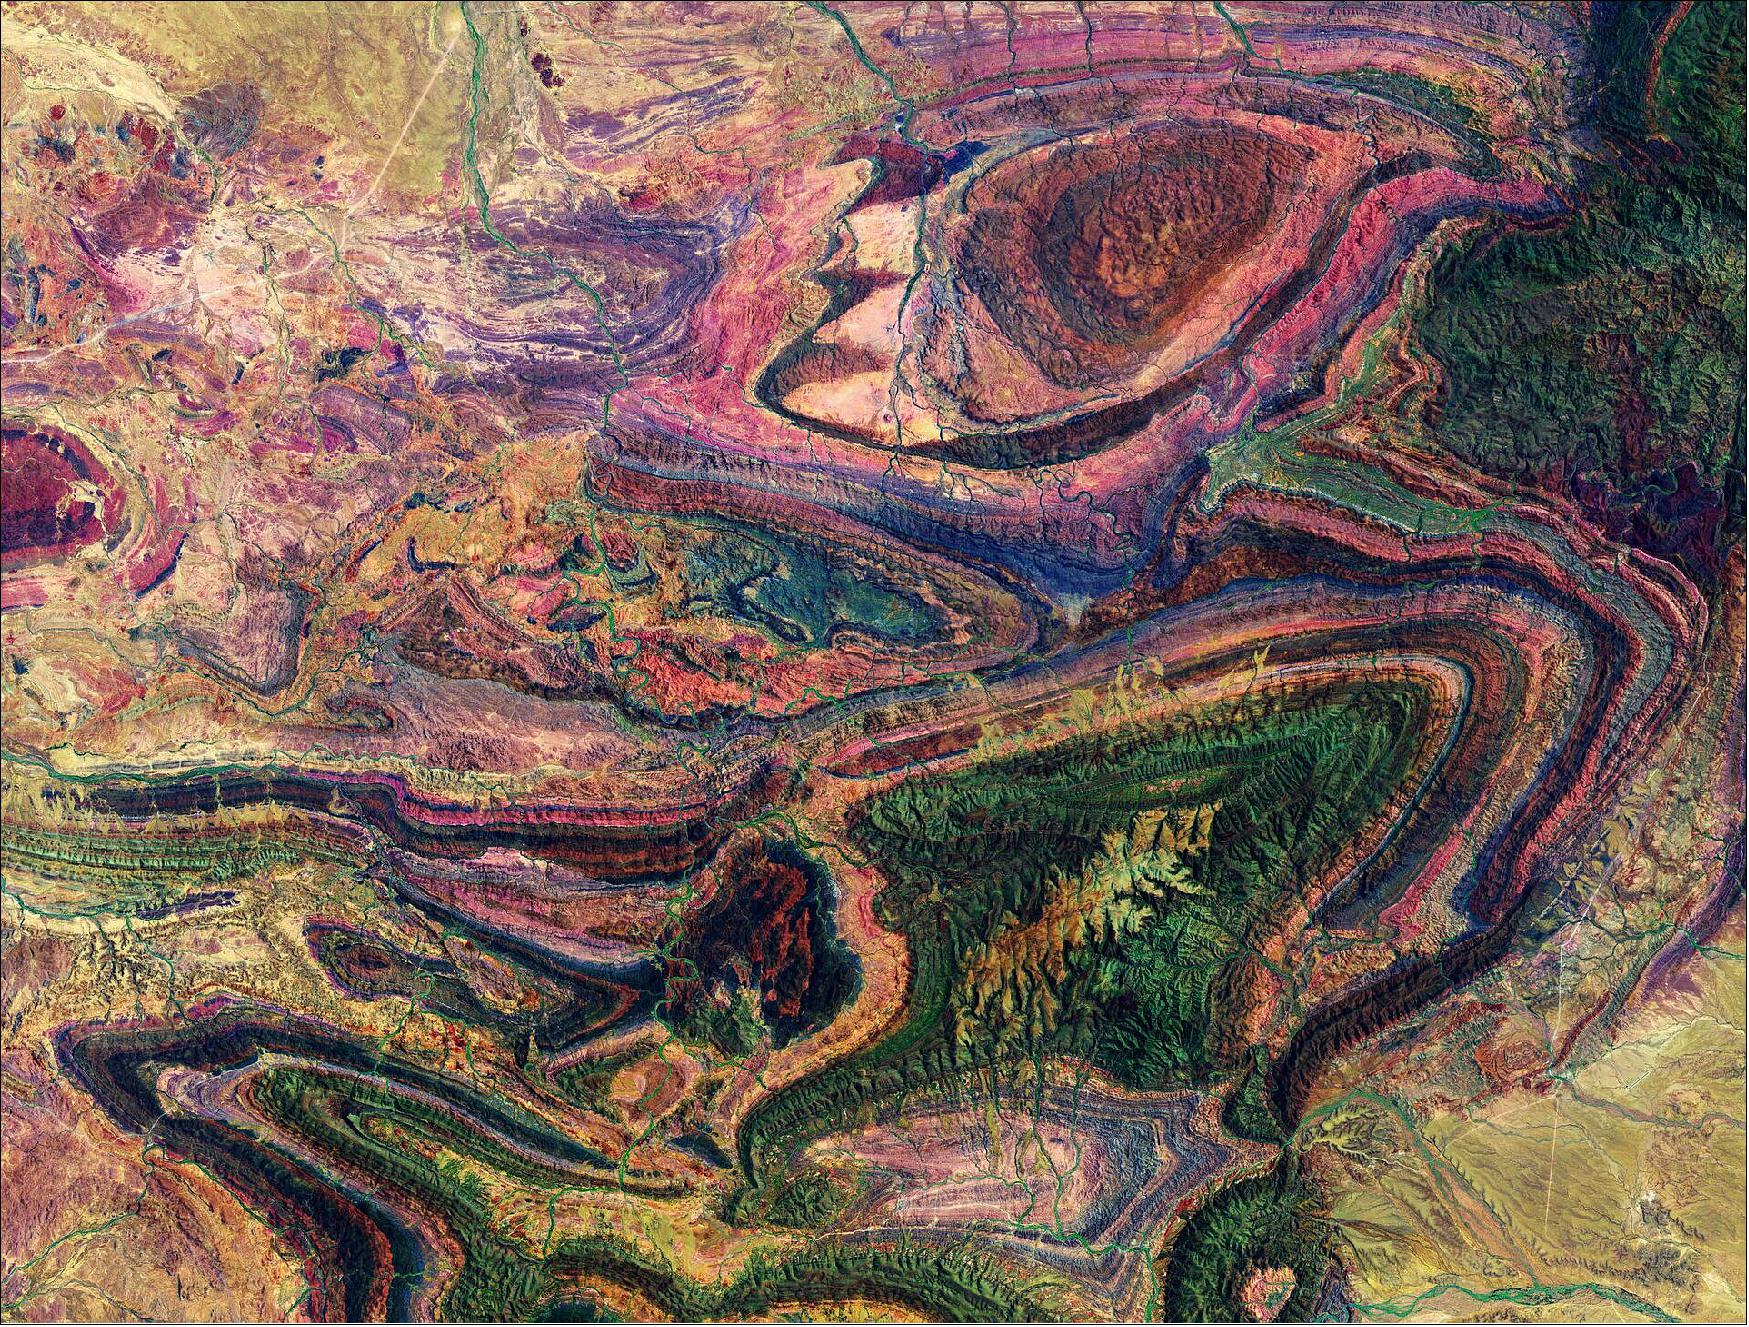 Figure 25: The many colorful curves and folds of the Flinders Ranges – the largest mountain range in South Australia – are featured in this false-color image captured by the Copernicus Sentinel-2 mission. This image, also featured on the Earth from Space video program, was captured on 31 December 2019 by the Copernicus Sentinel-2 mission – a two-satellite mission to supply the coverage and data delivery needed for Europe’s Copernicus program. The image was processed by selecting spectral bands that can be used for classifying geological features (image credit: ESA, the image contains modified Copernicus Sentinel data (2019), processed by ESA, CC BY-SA 3.0 IGO)